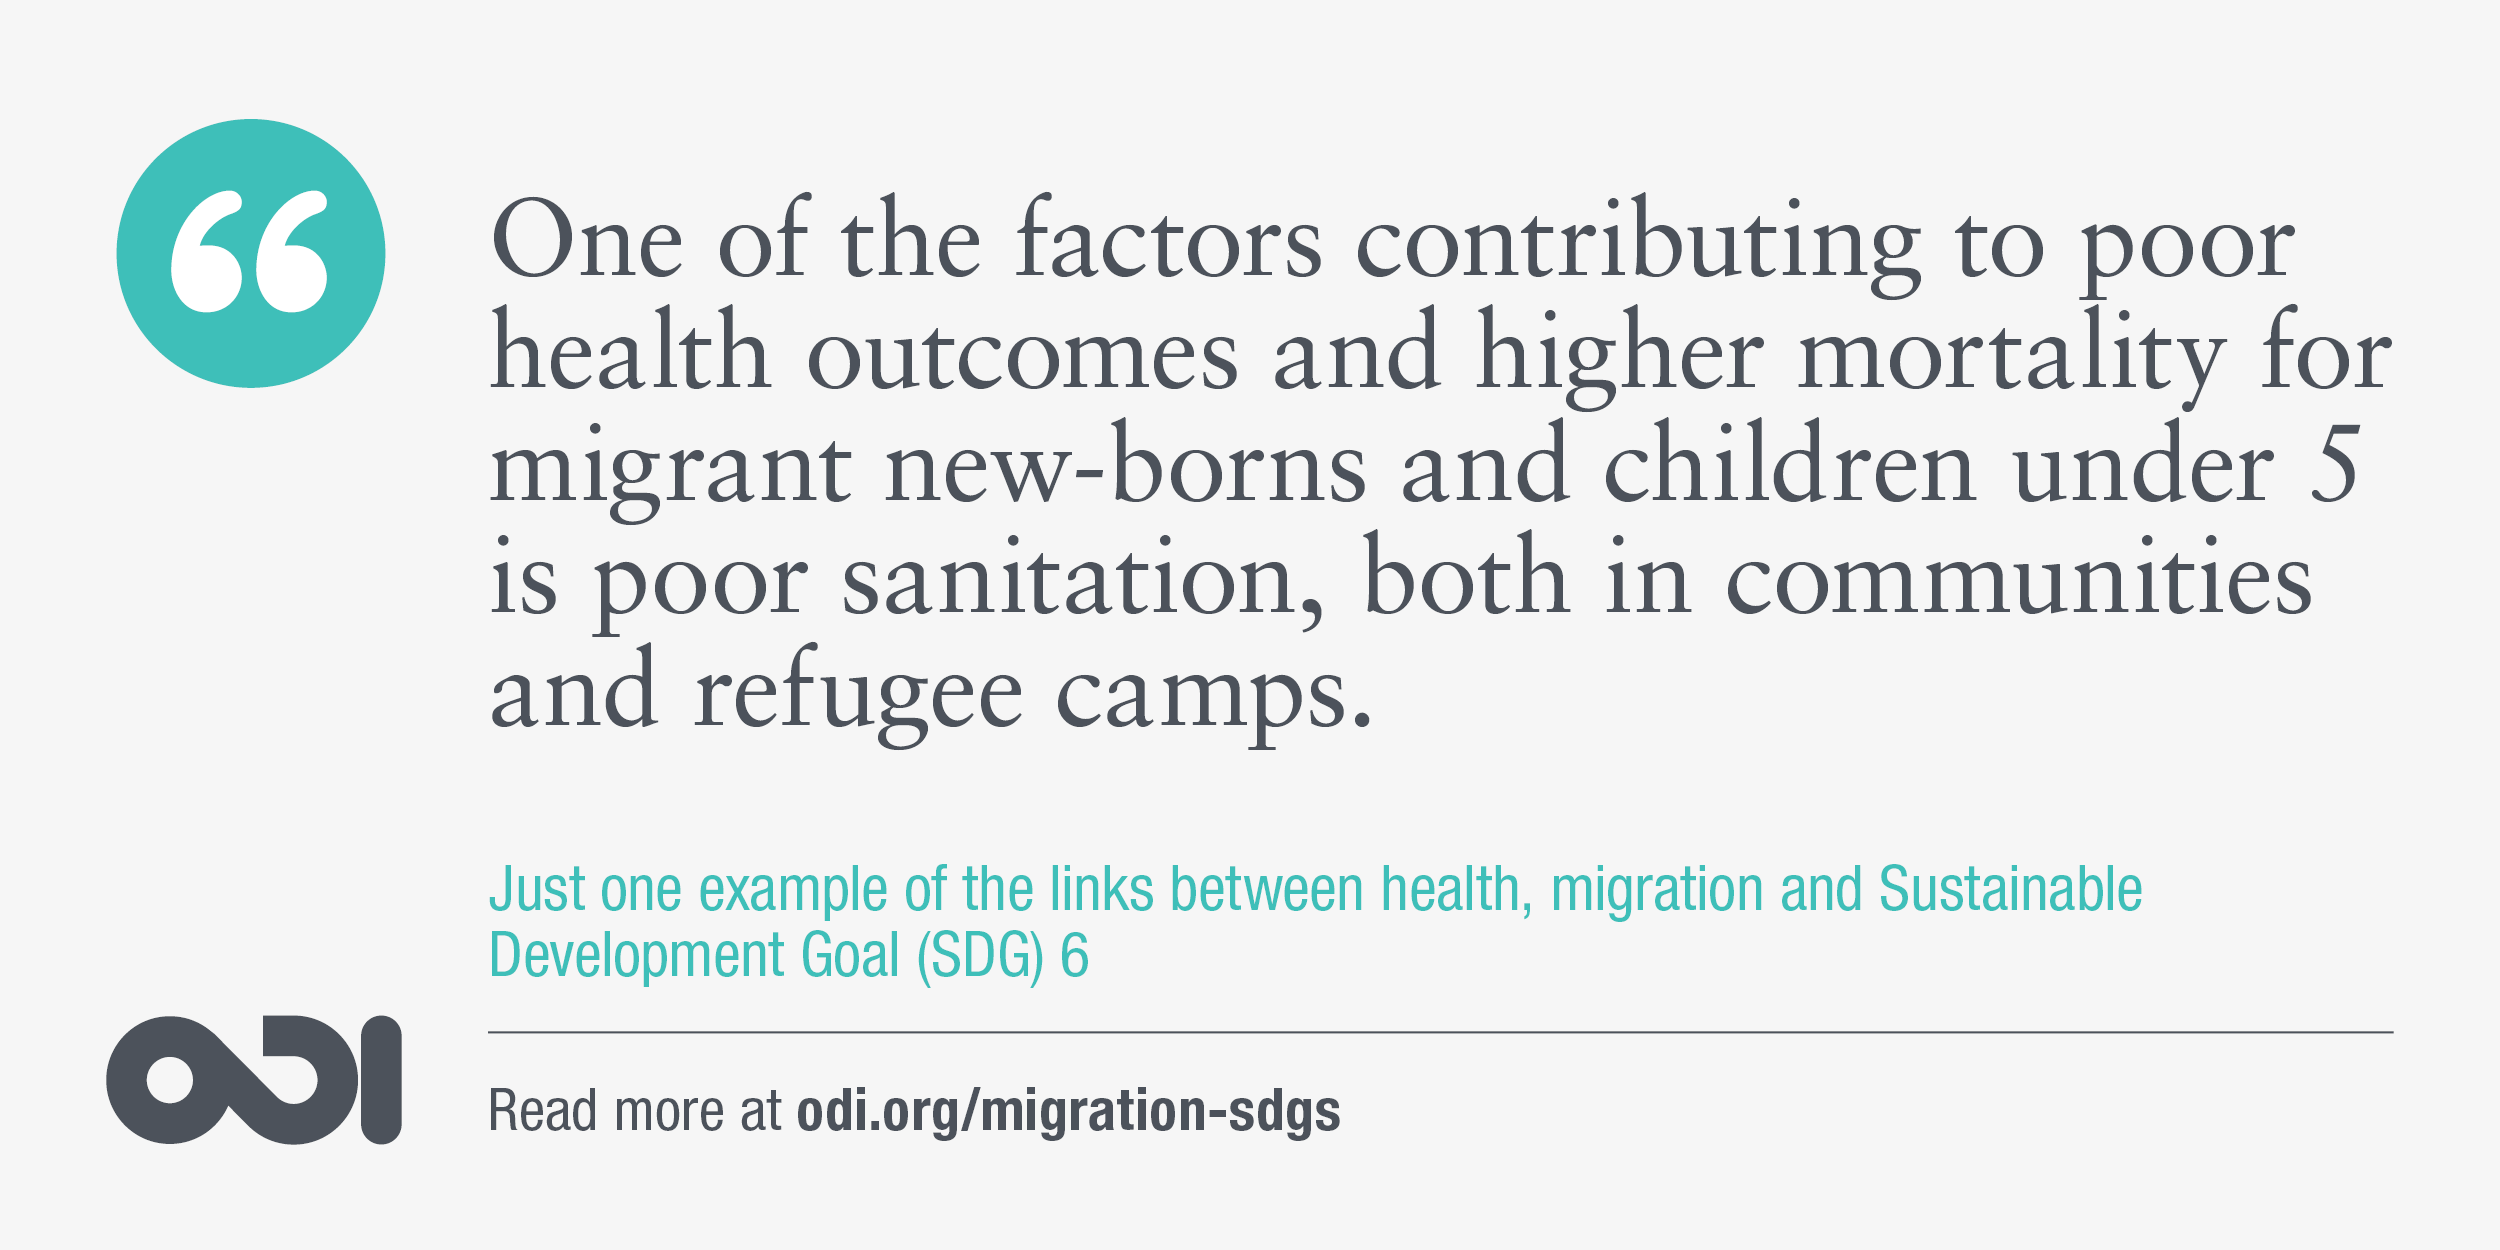 The links between health, migration and SDG 6.